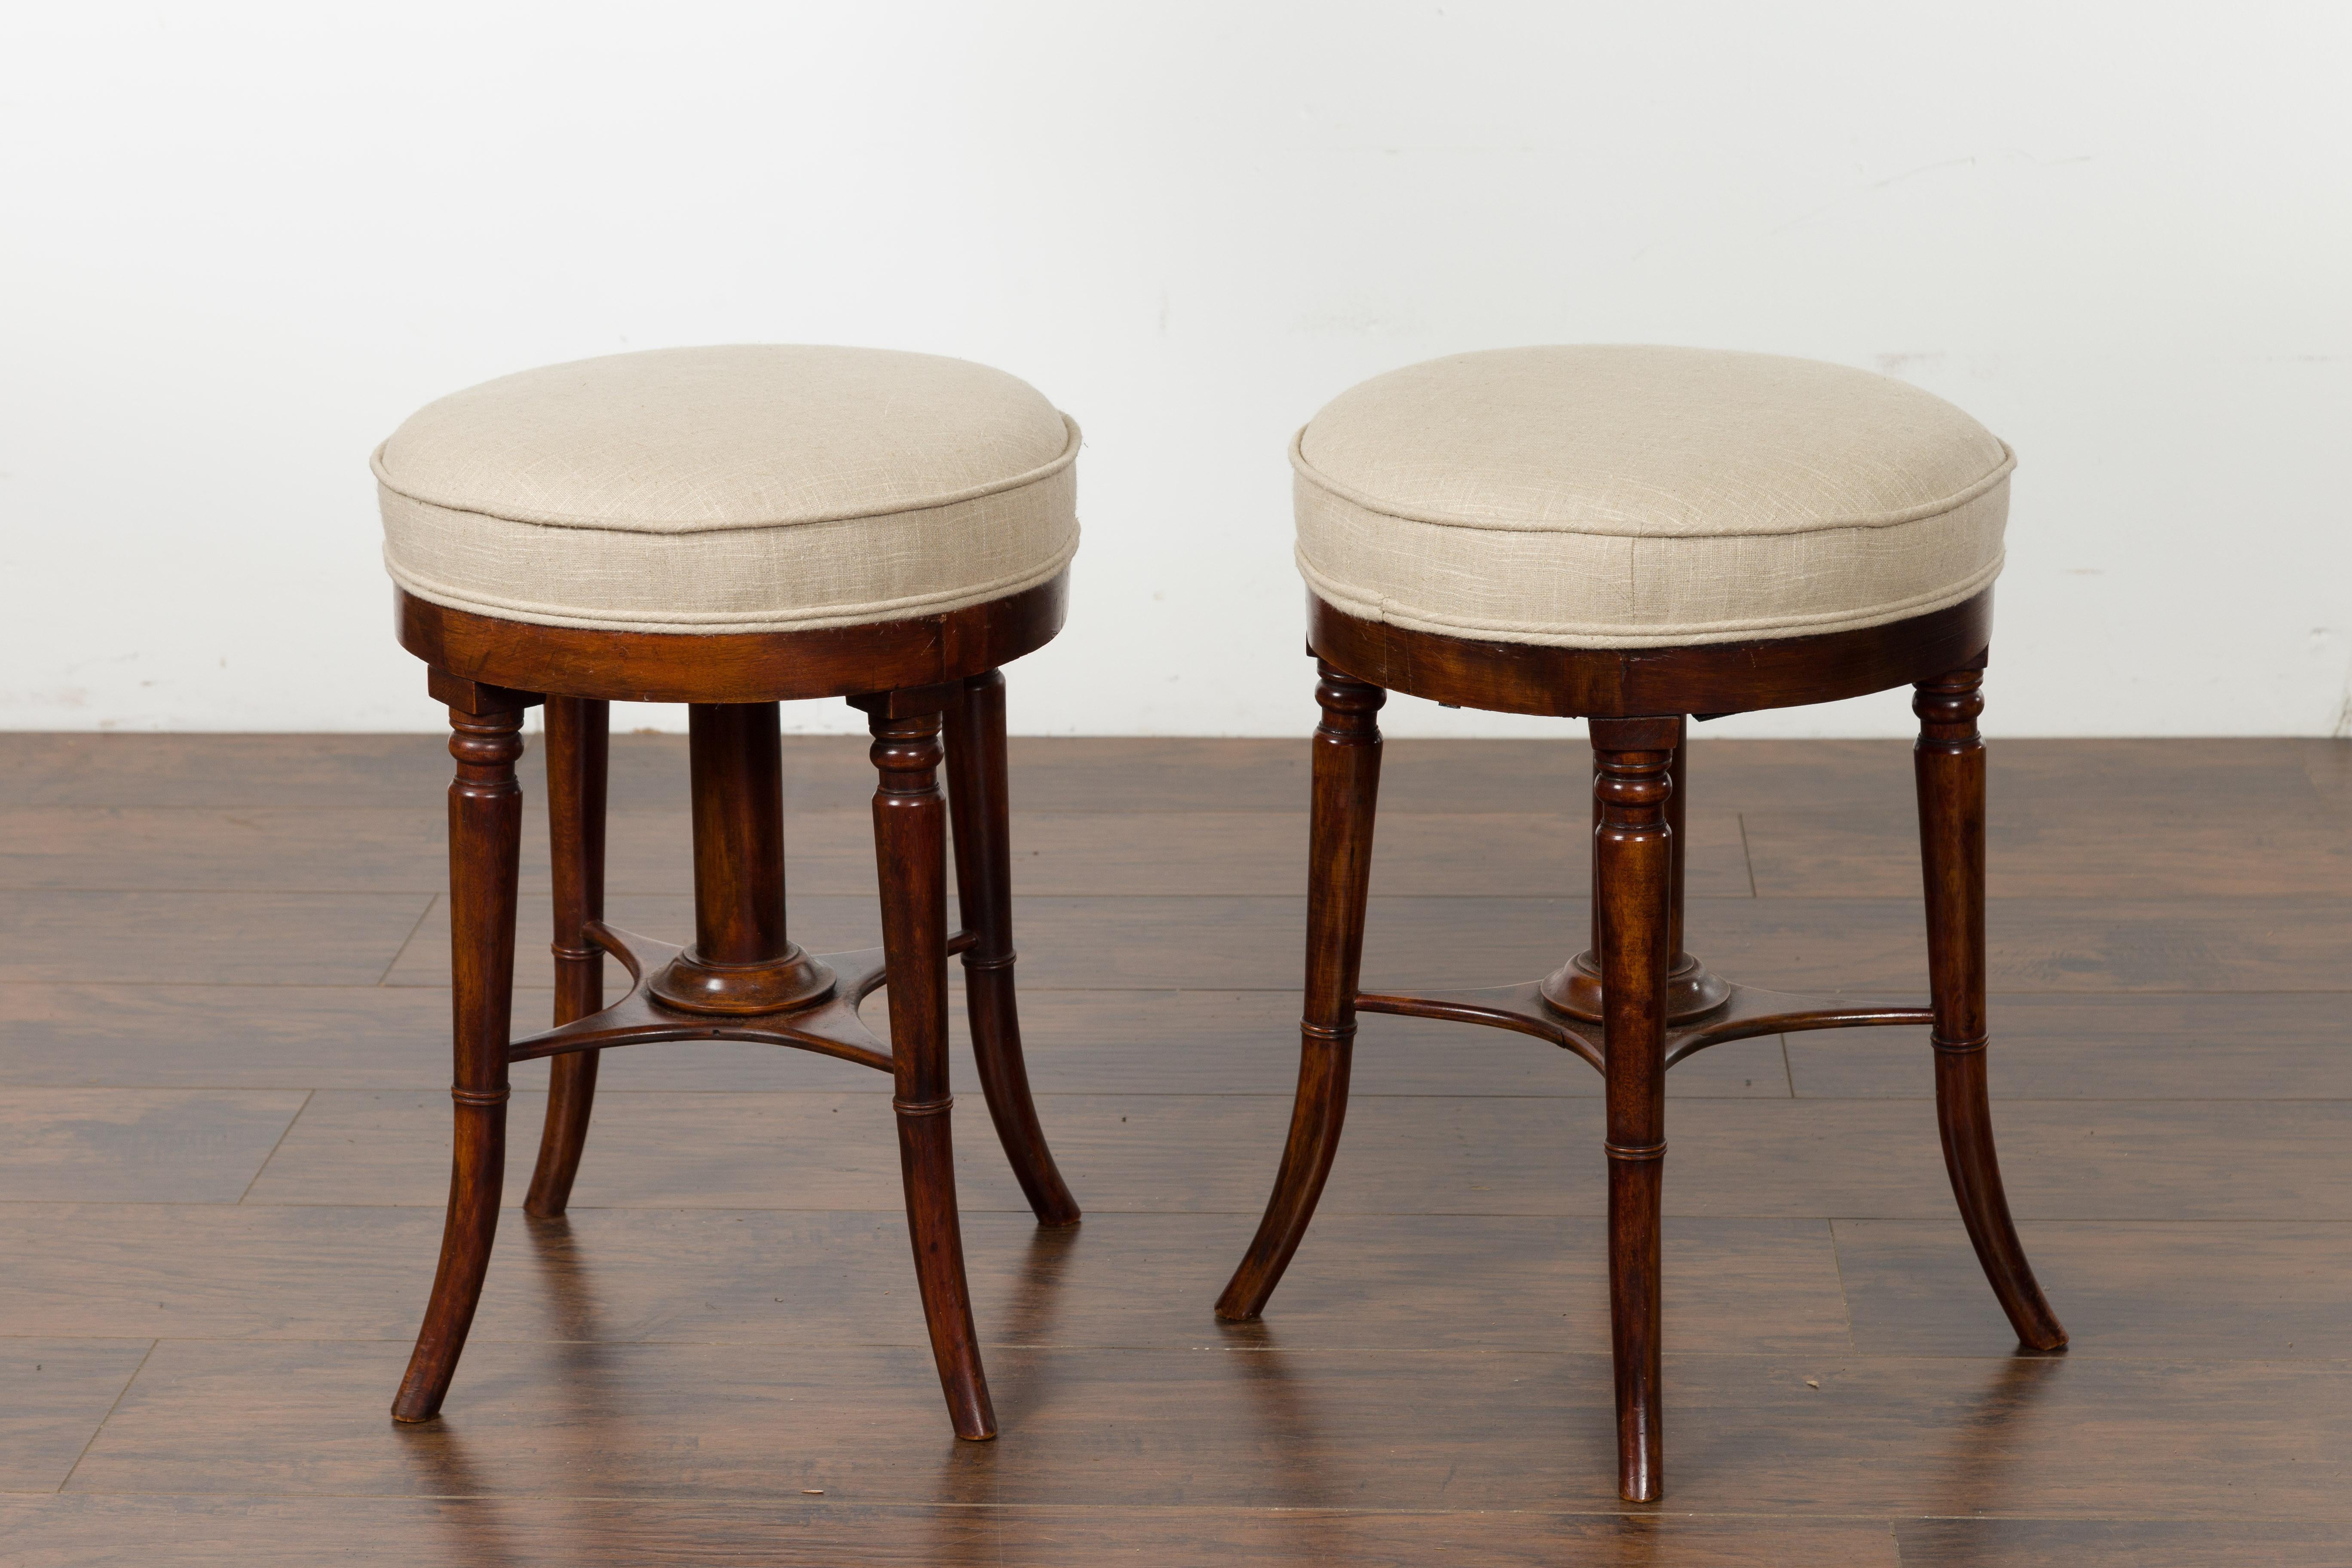 Pair of English 1920s Mahogany Stools with Turned Legs and New Upholstery For Sale 8